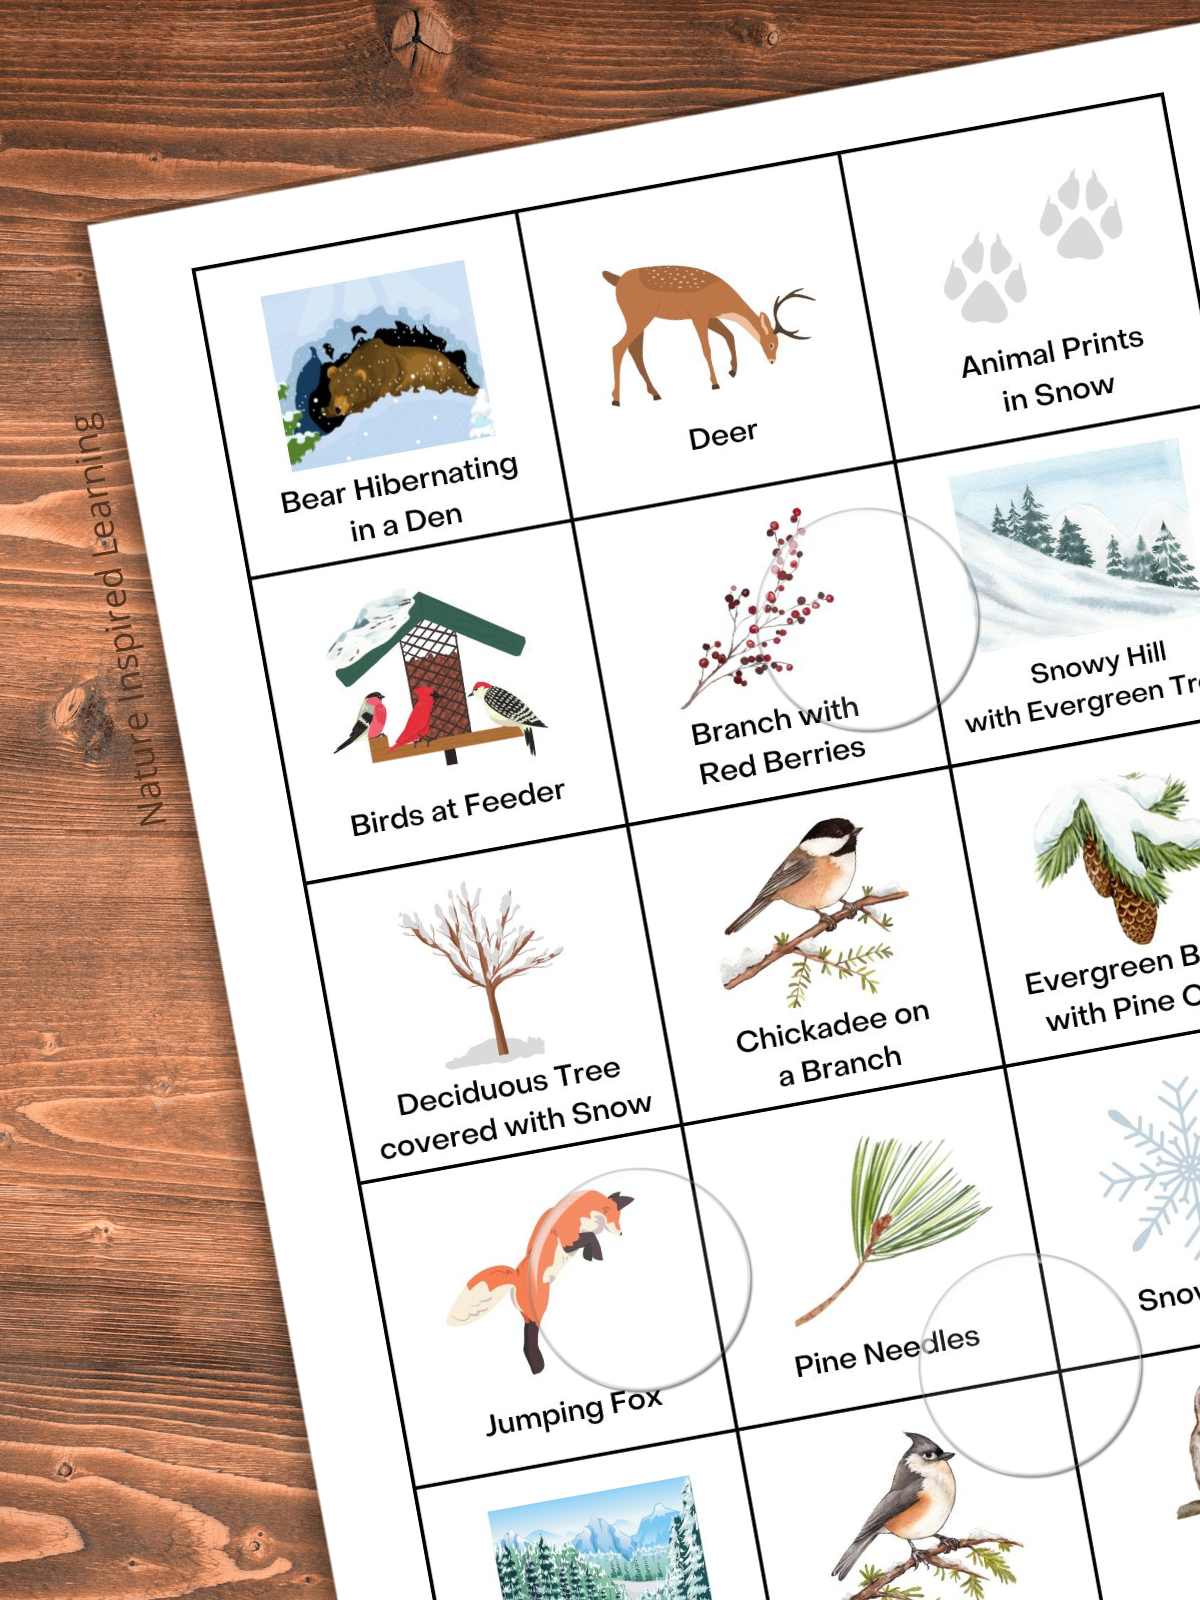 printed out winter bingo calling cards with natural items including a deer, pine needles, and birds on a wooden background with clear bingo chips